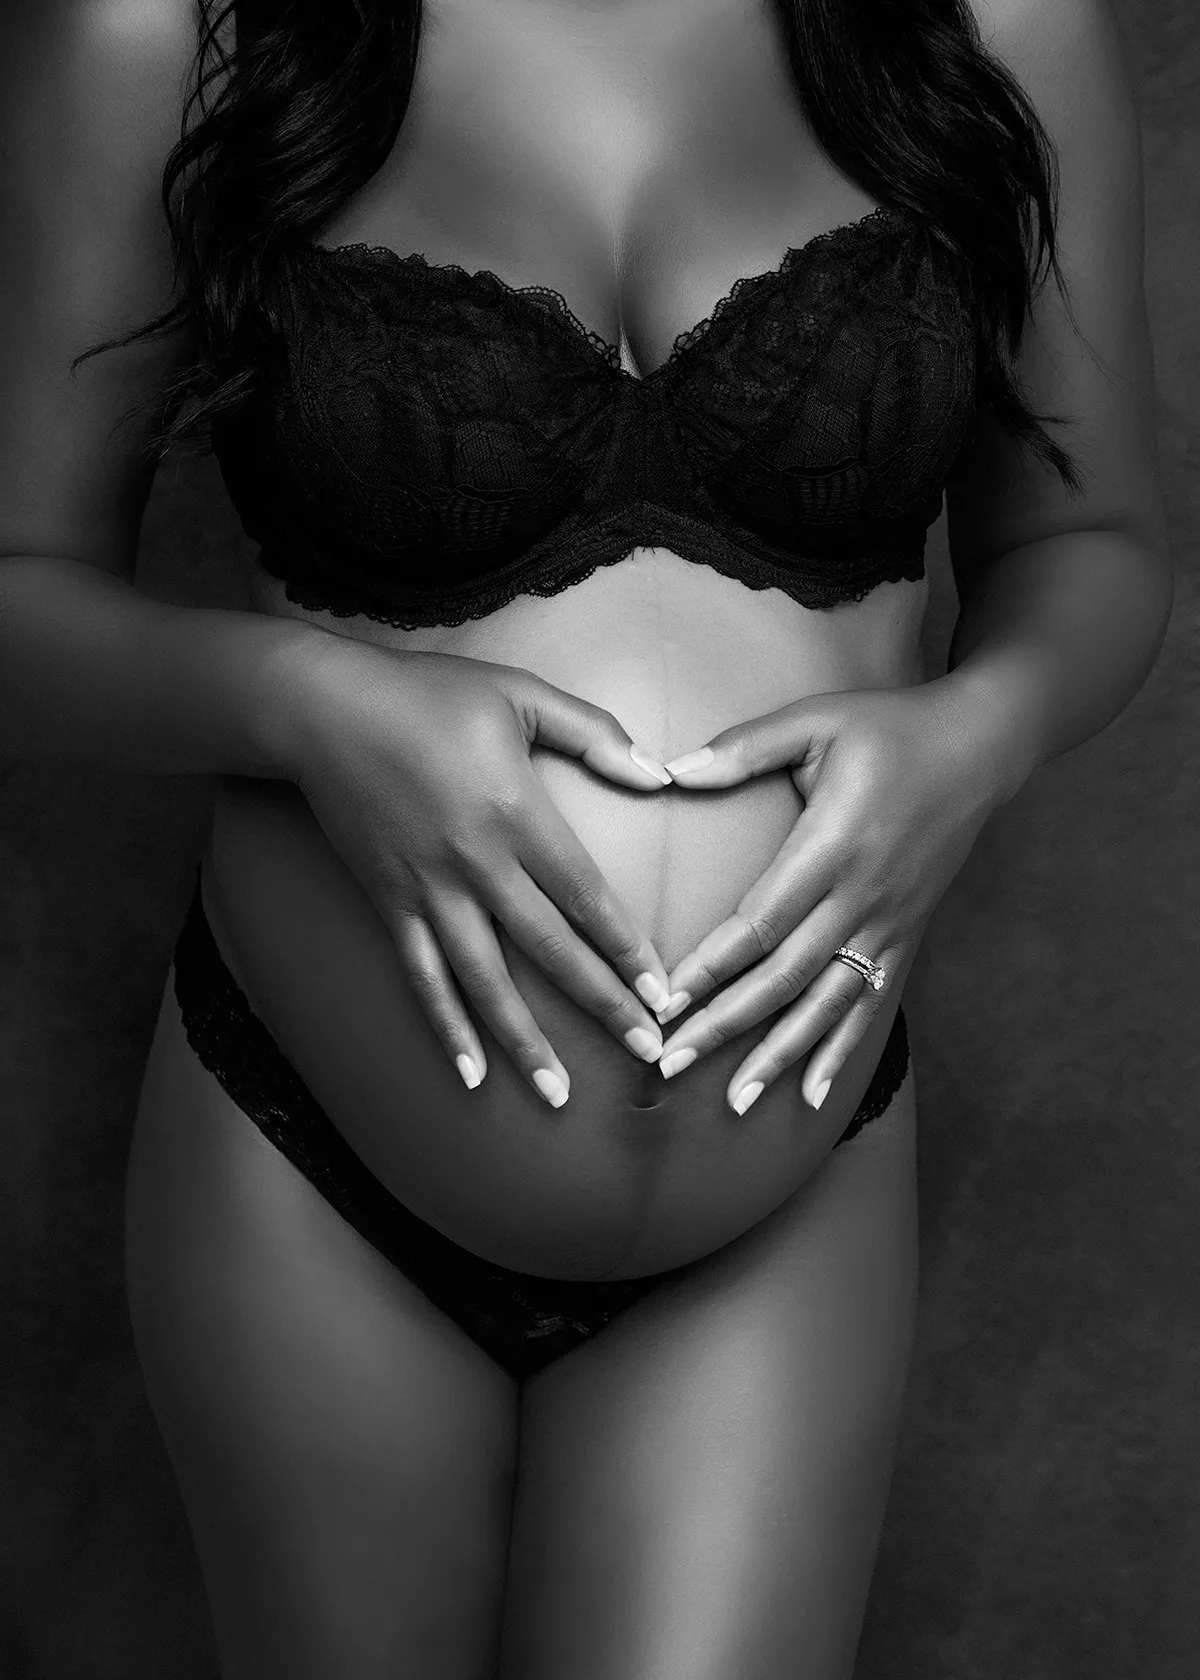 Black and white artistic boudoir maternity portrait of a pregnant woman wearing a black bra and pant. Image is focused on her belly with her hands making a heart shape on top. Maternity photograph by Andrea Liora Studios in San Francisco CA.